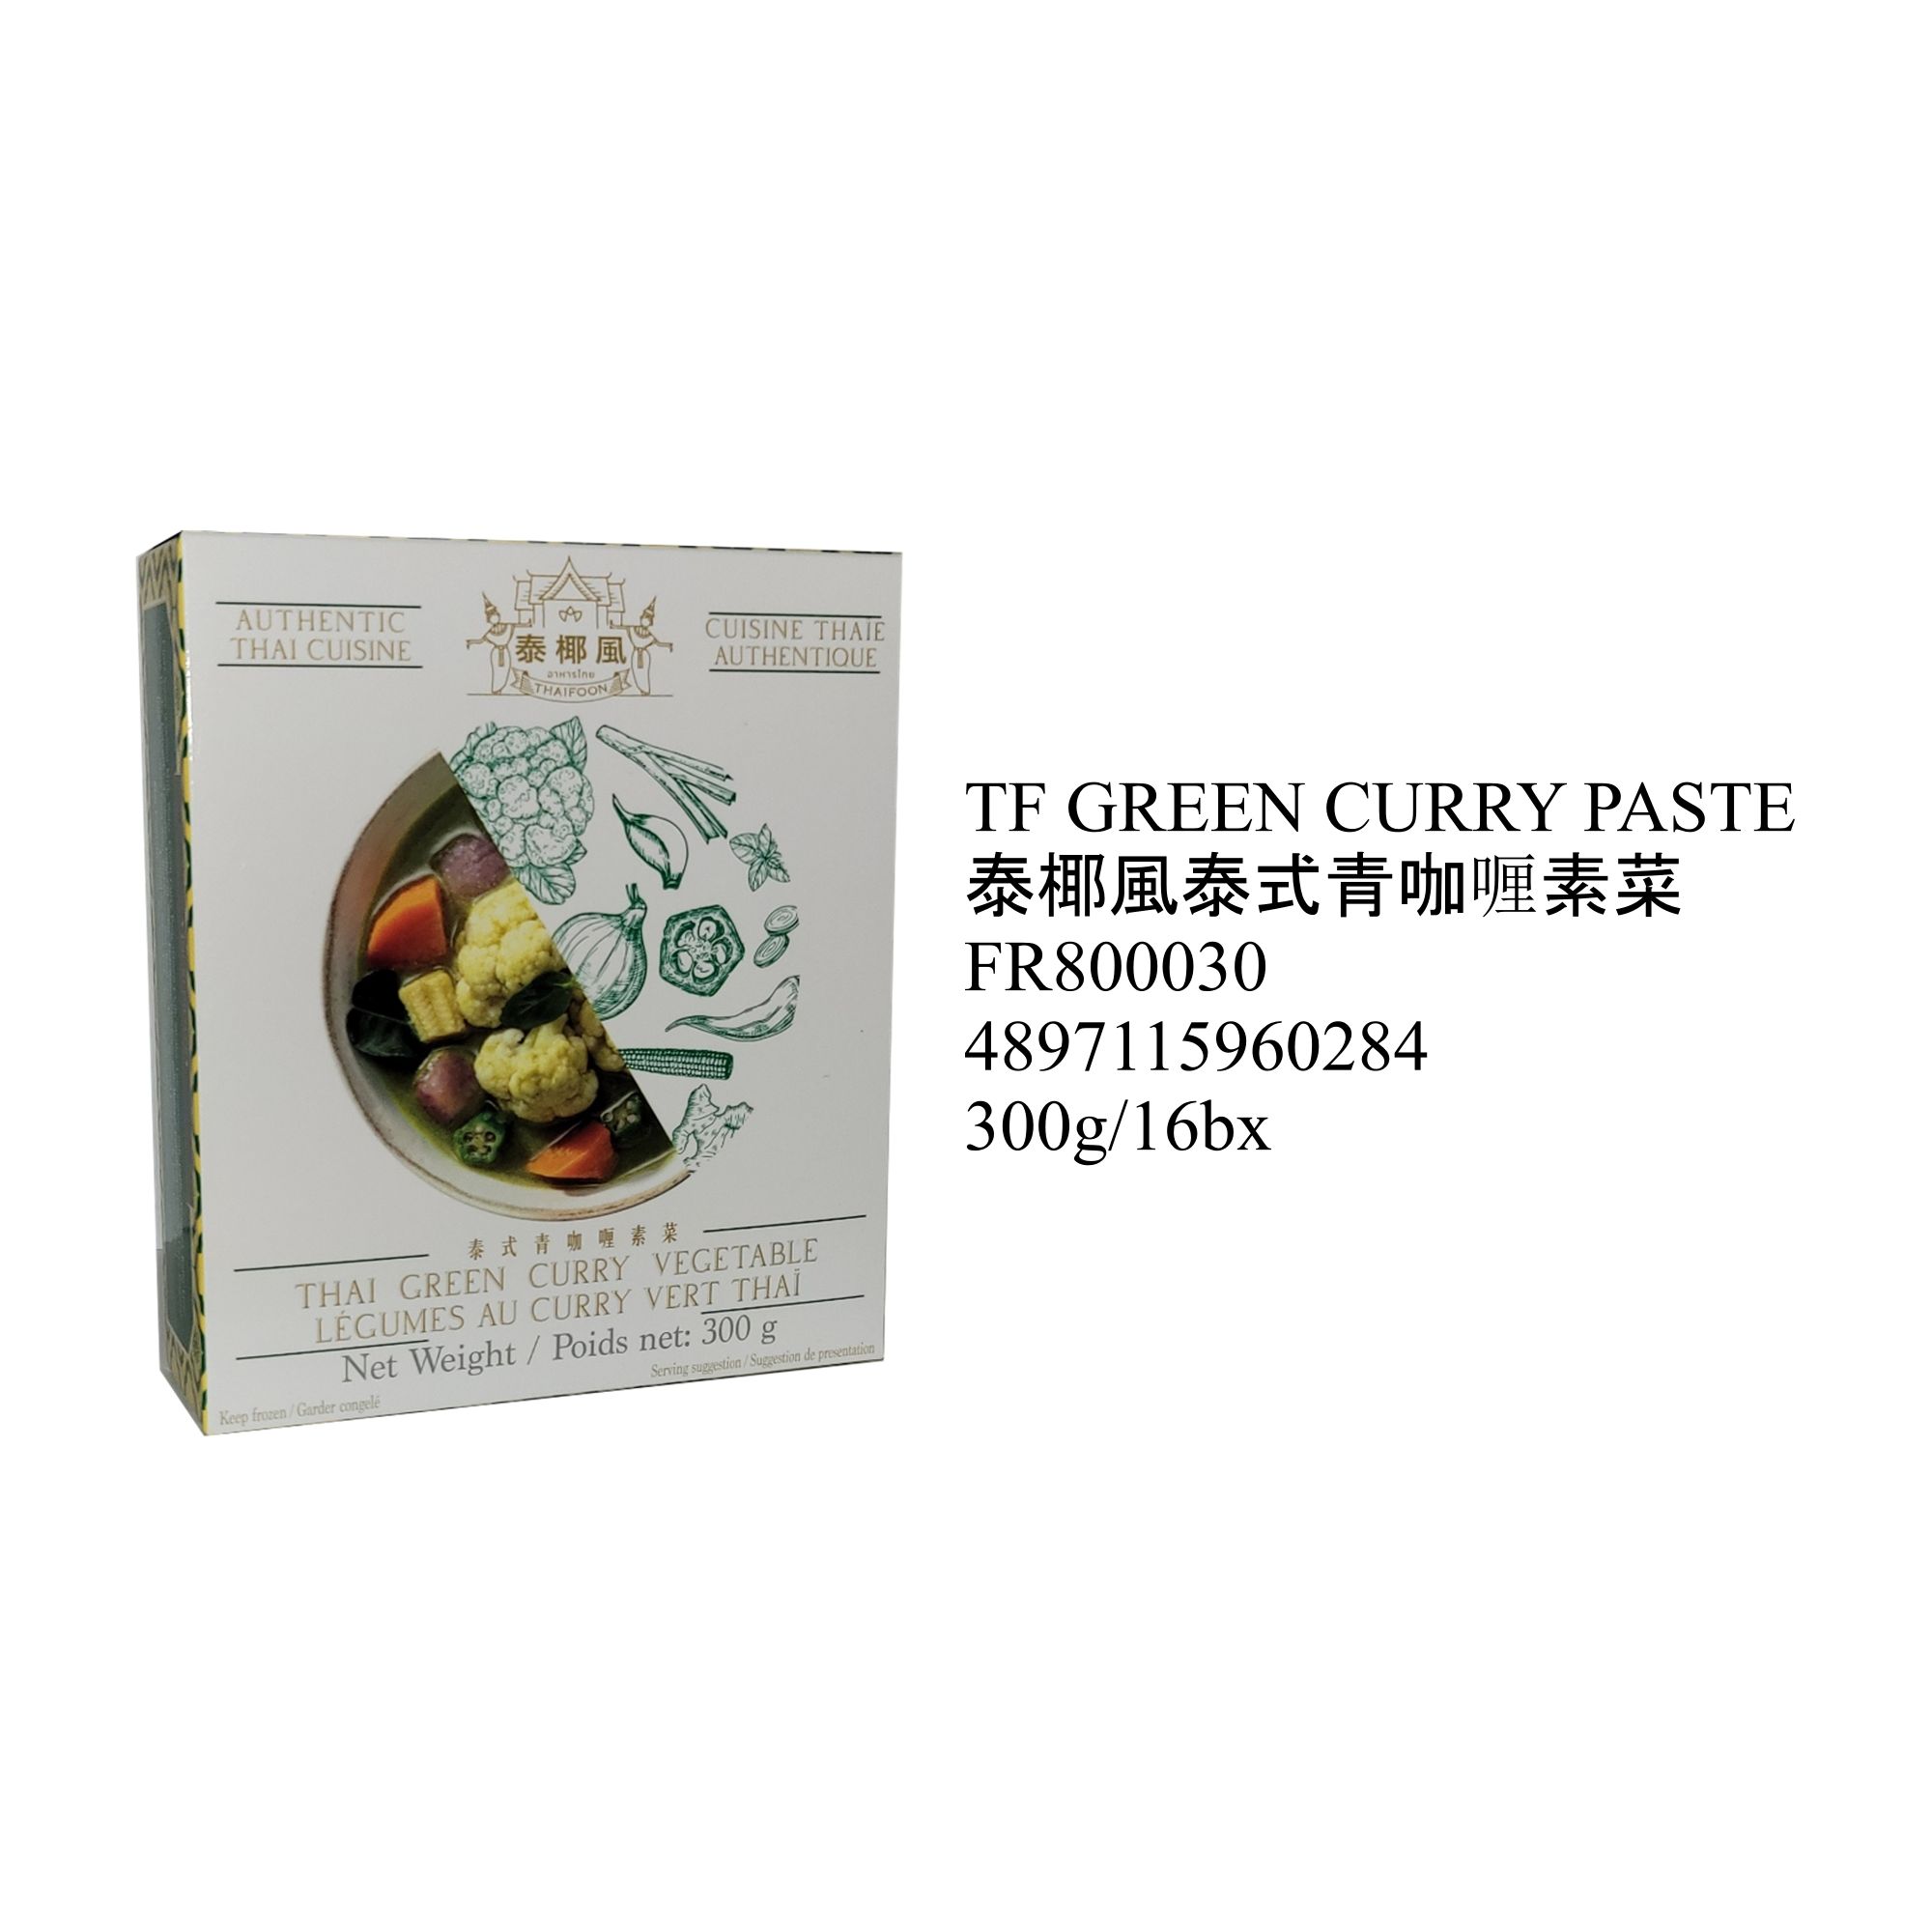 TF GREEN CURRY PASTE FR800030